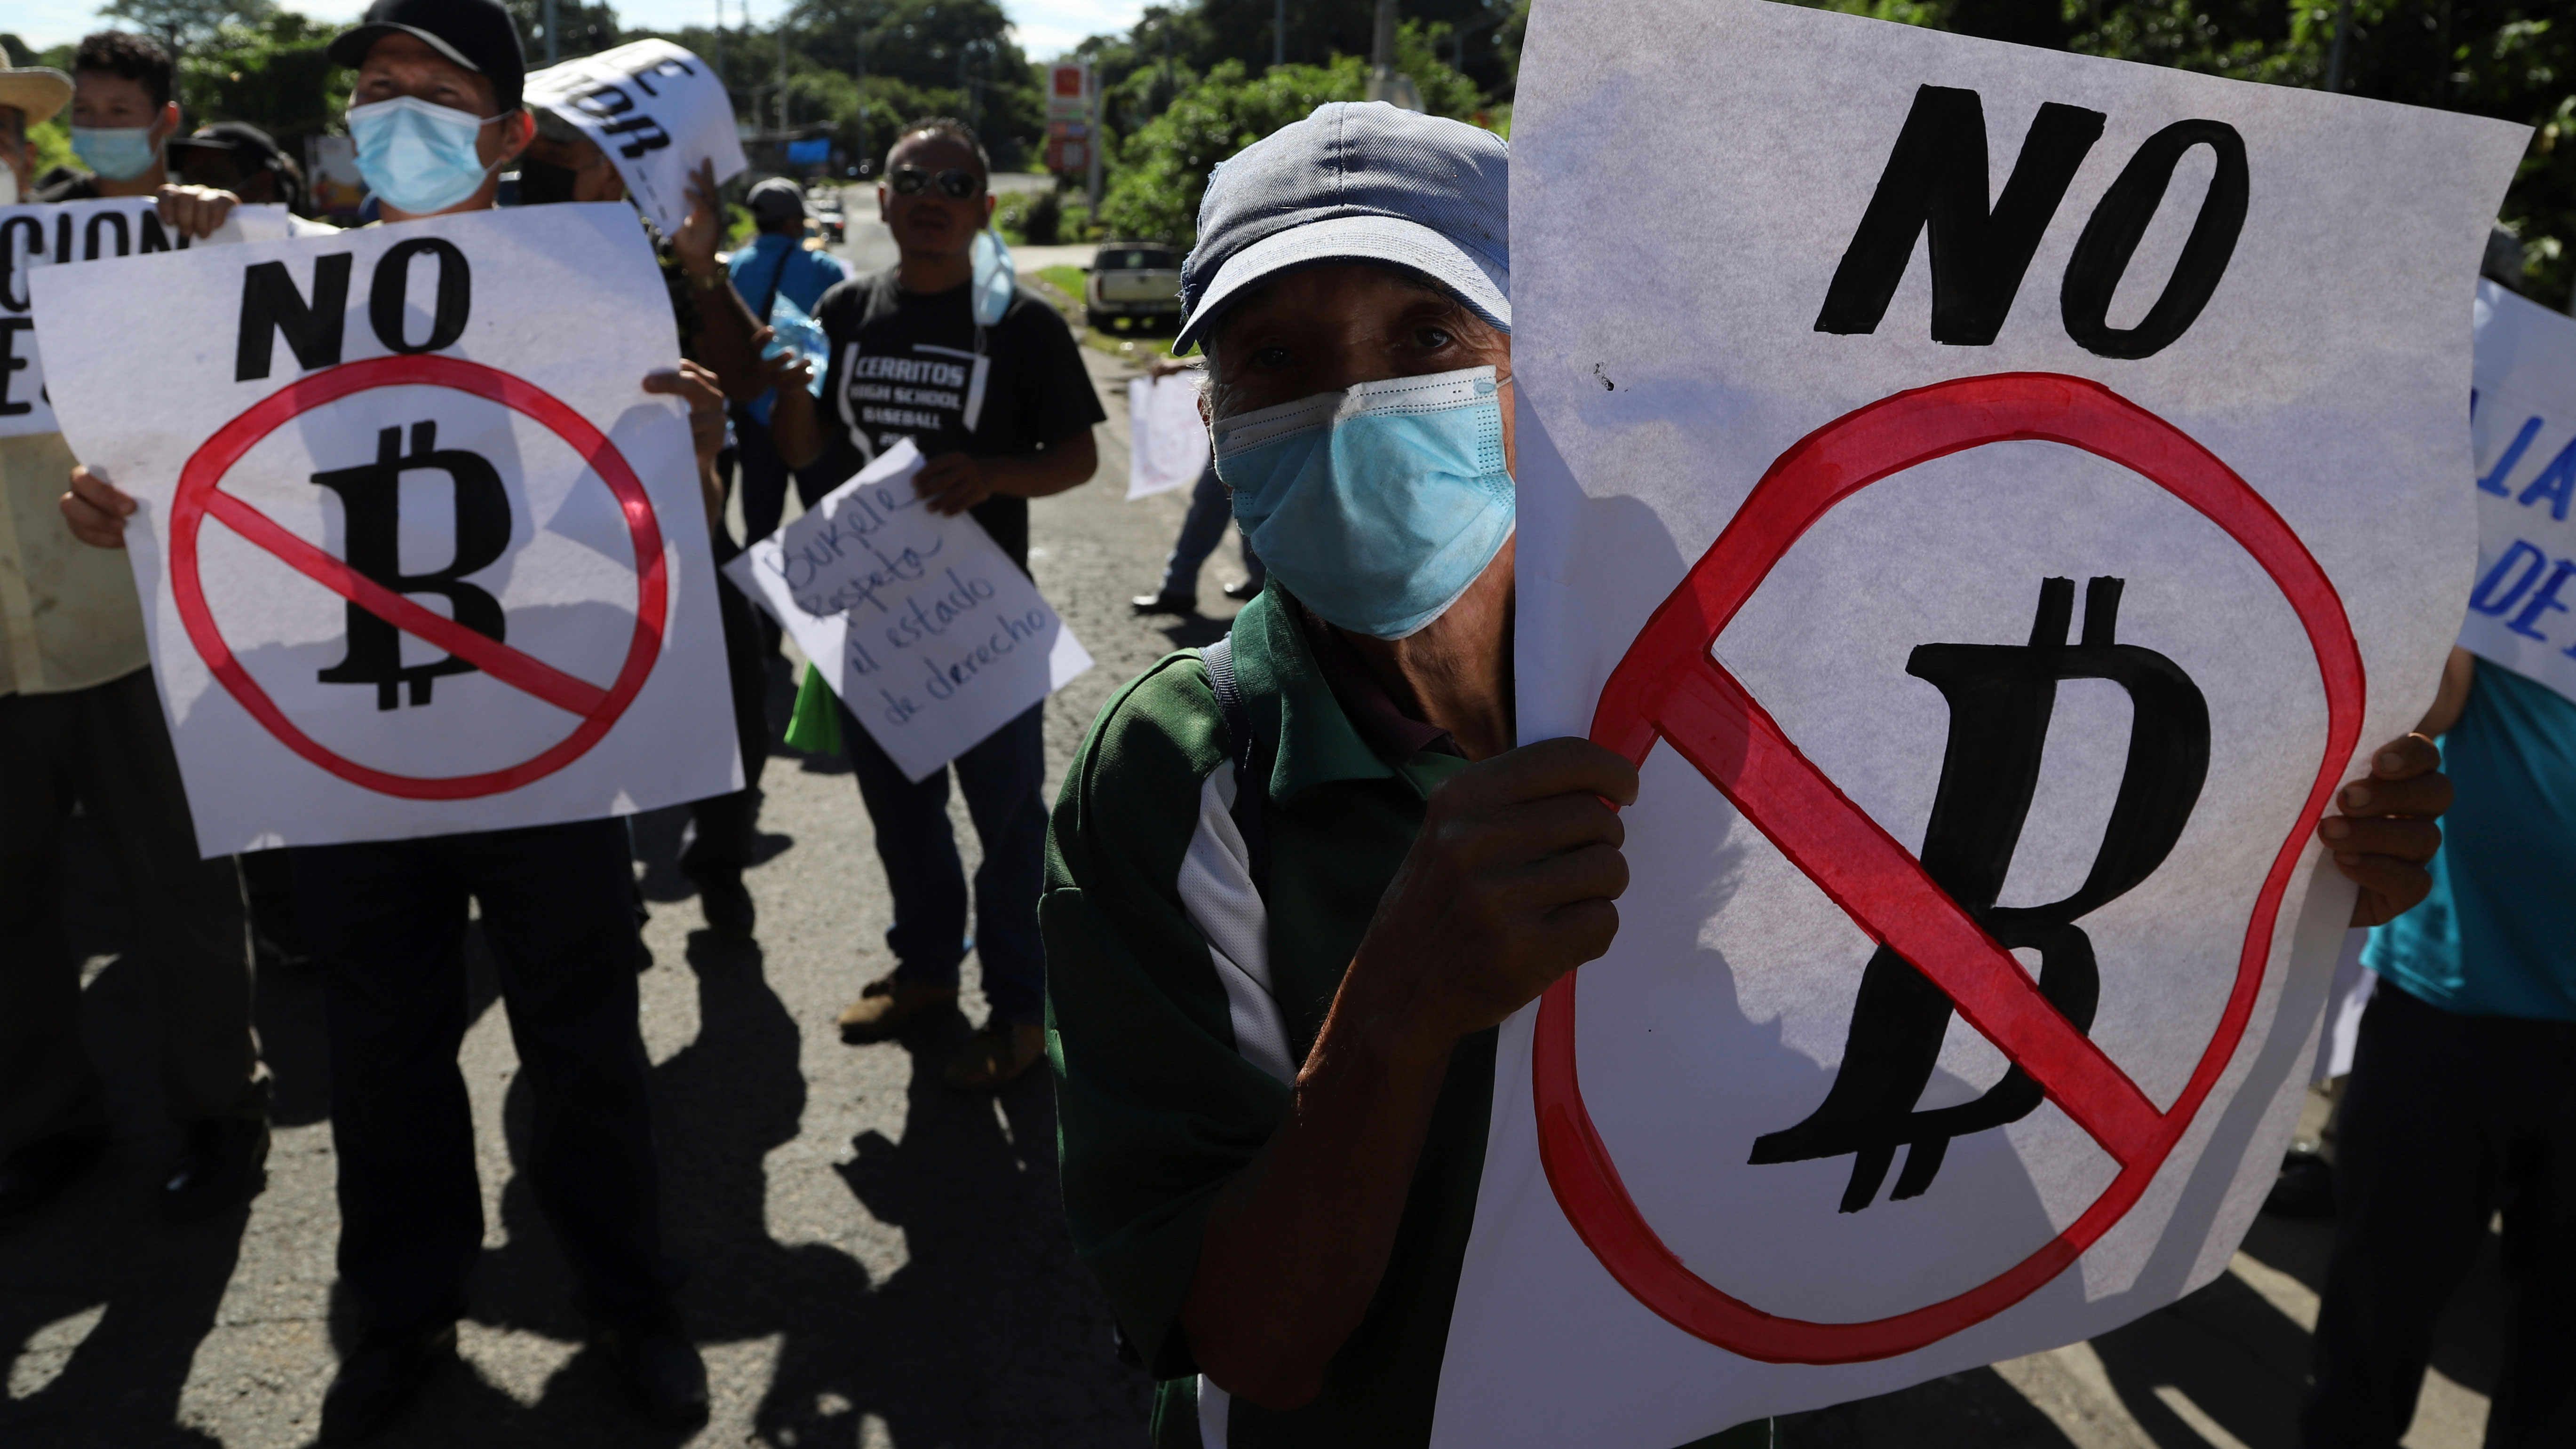 Farmers hold signs emblazoned with messages against the country adopting Bitcoin as legal tender, during a protest in El Salvador.